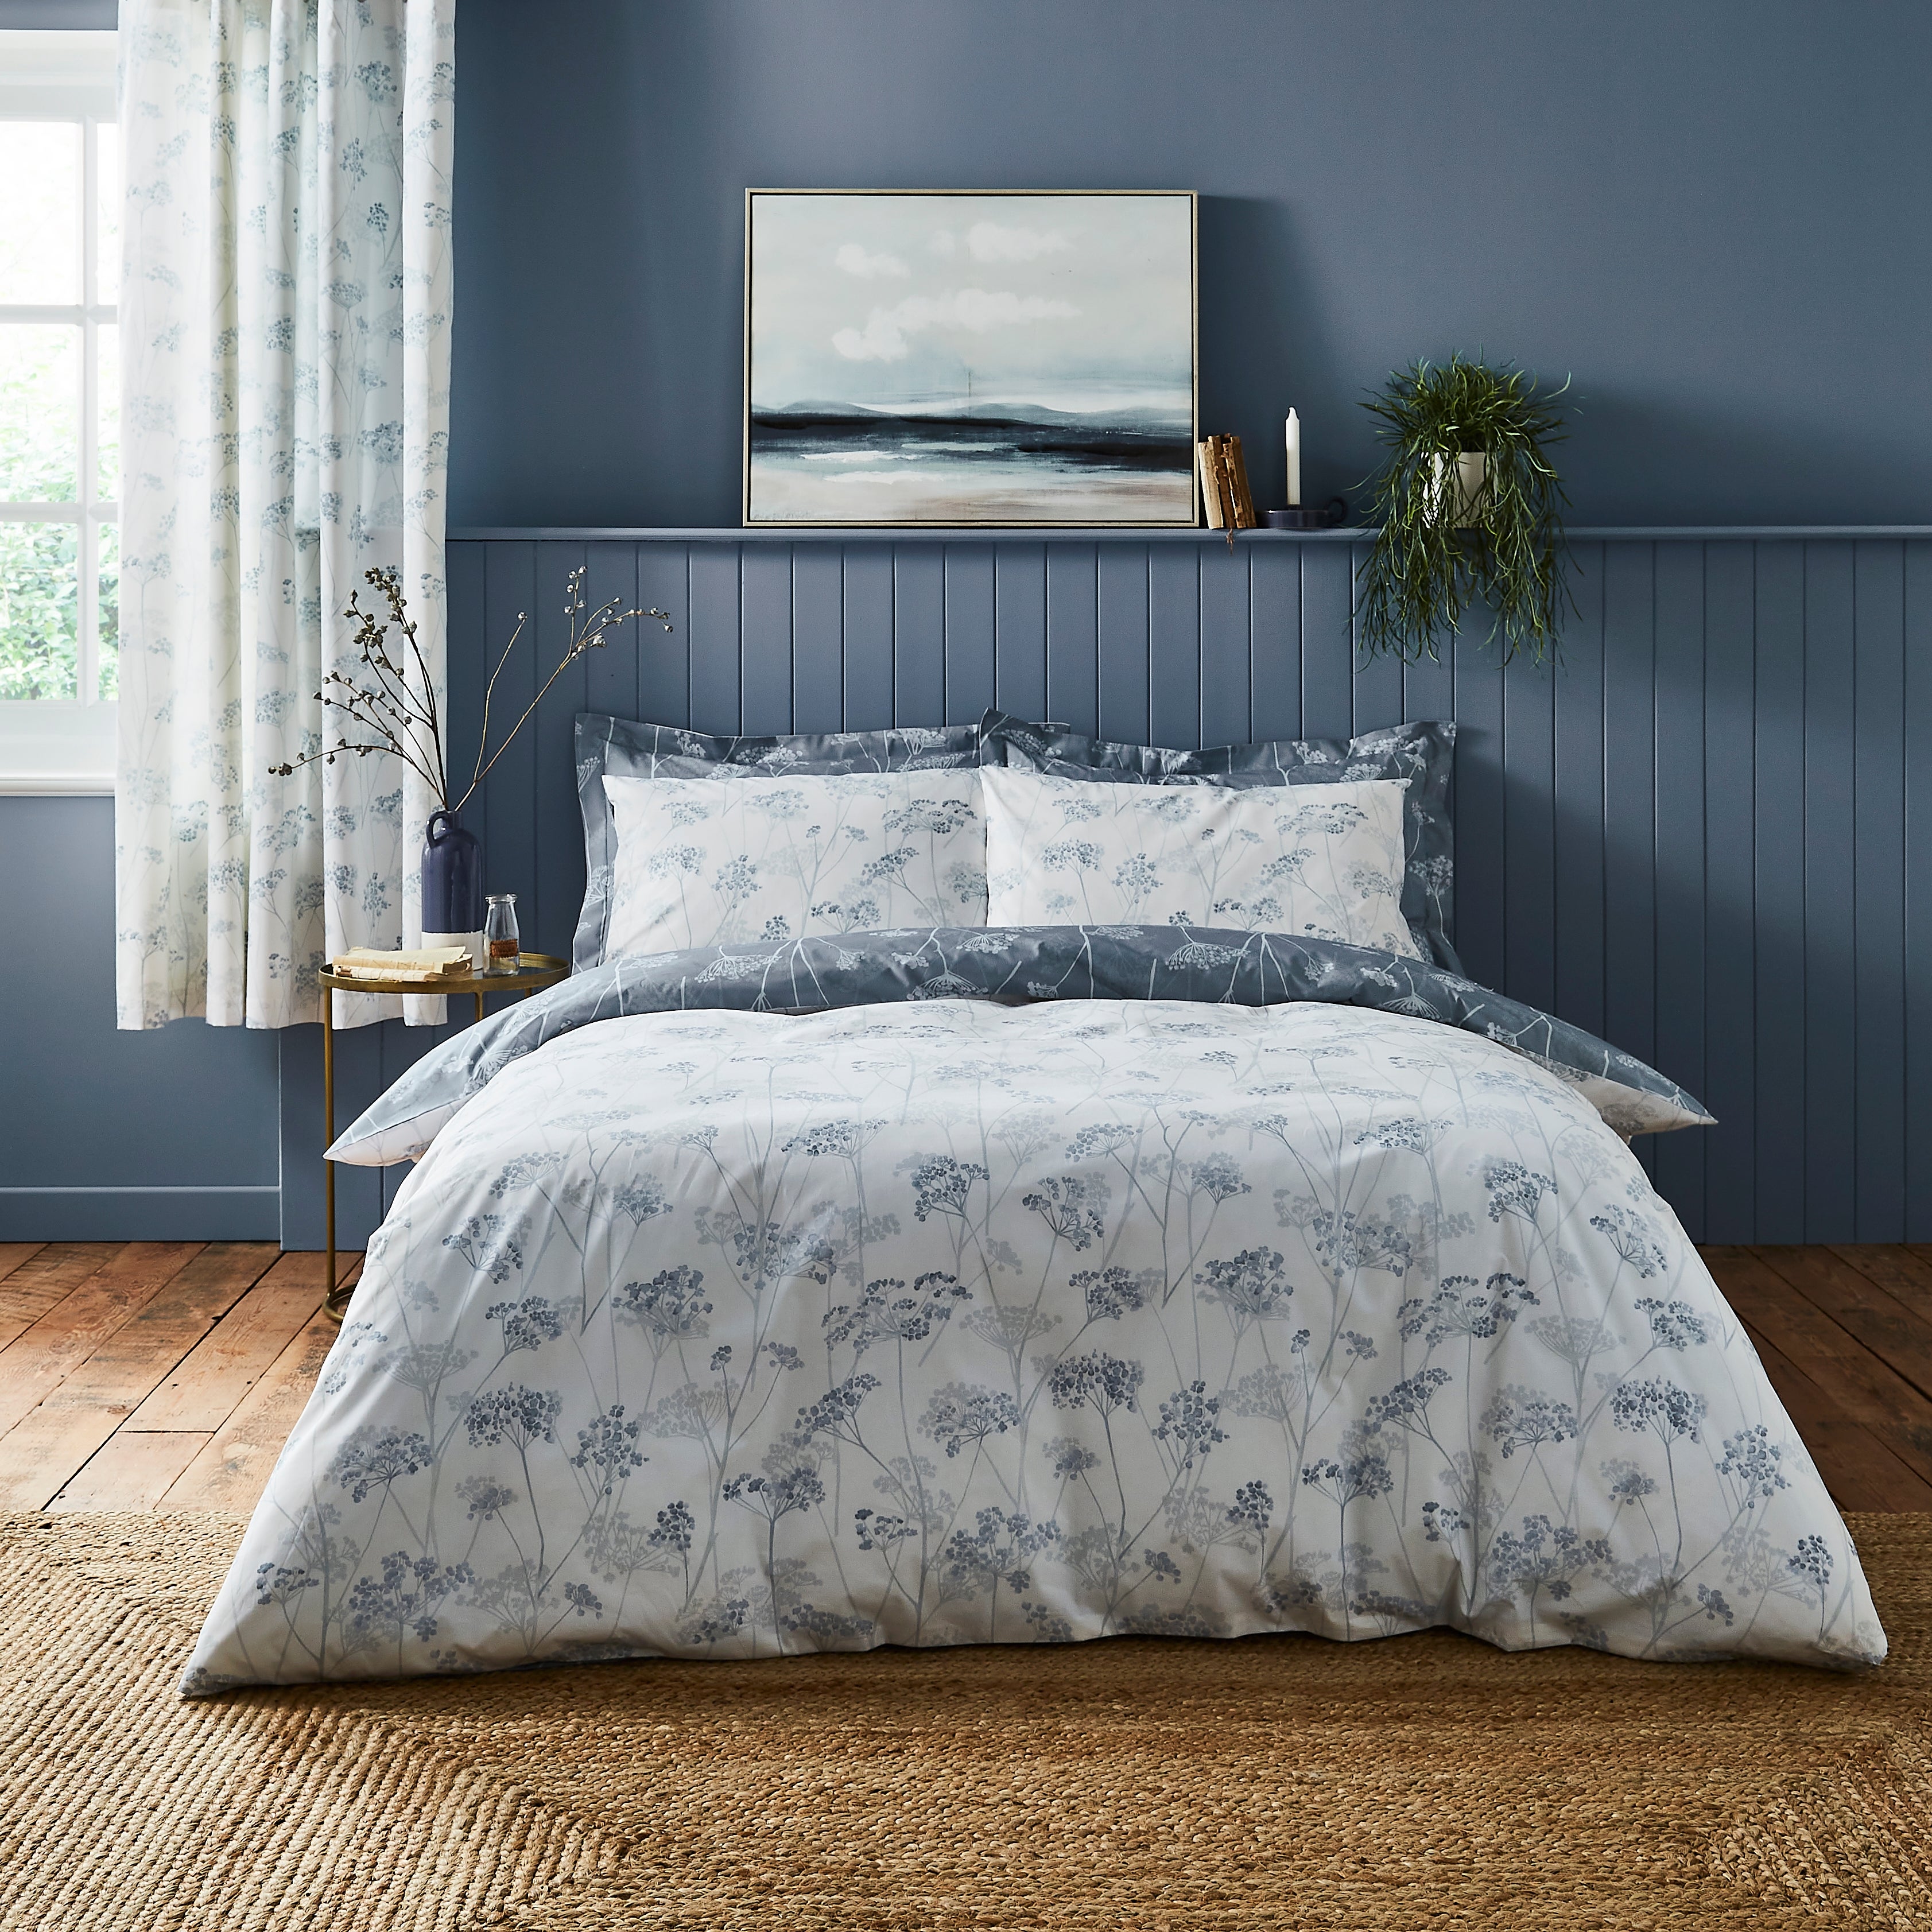 Cow Parsley Duvet Cover And Pillowcase Set Bluewhite